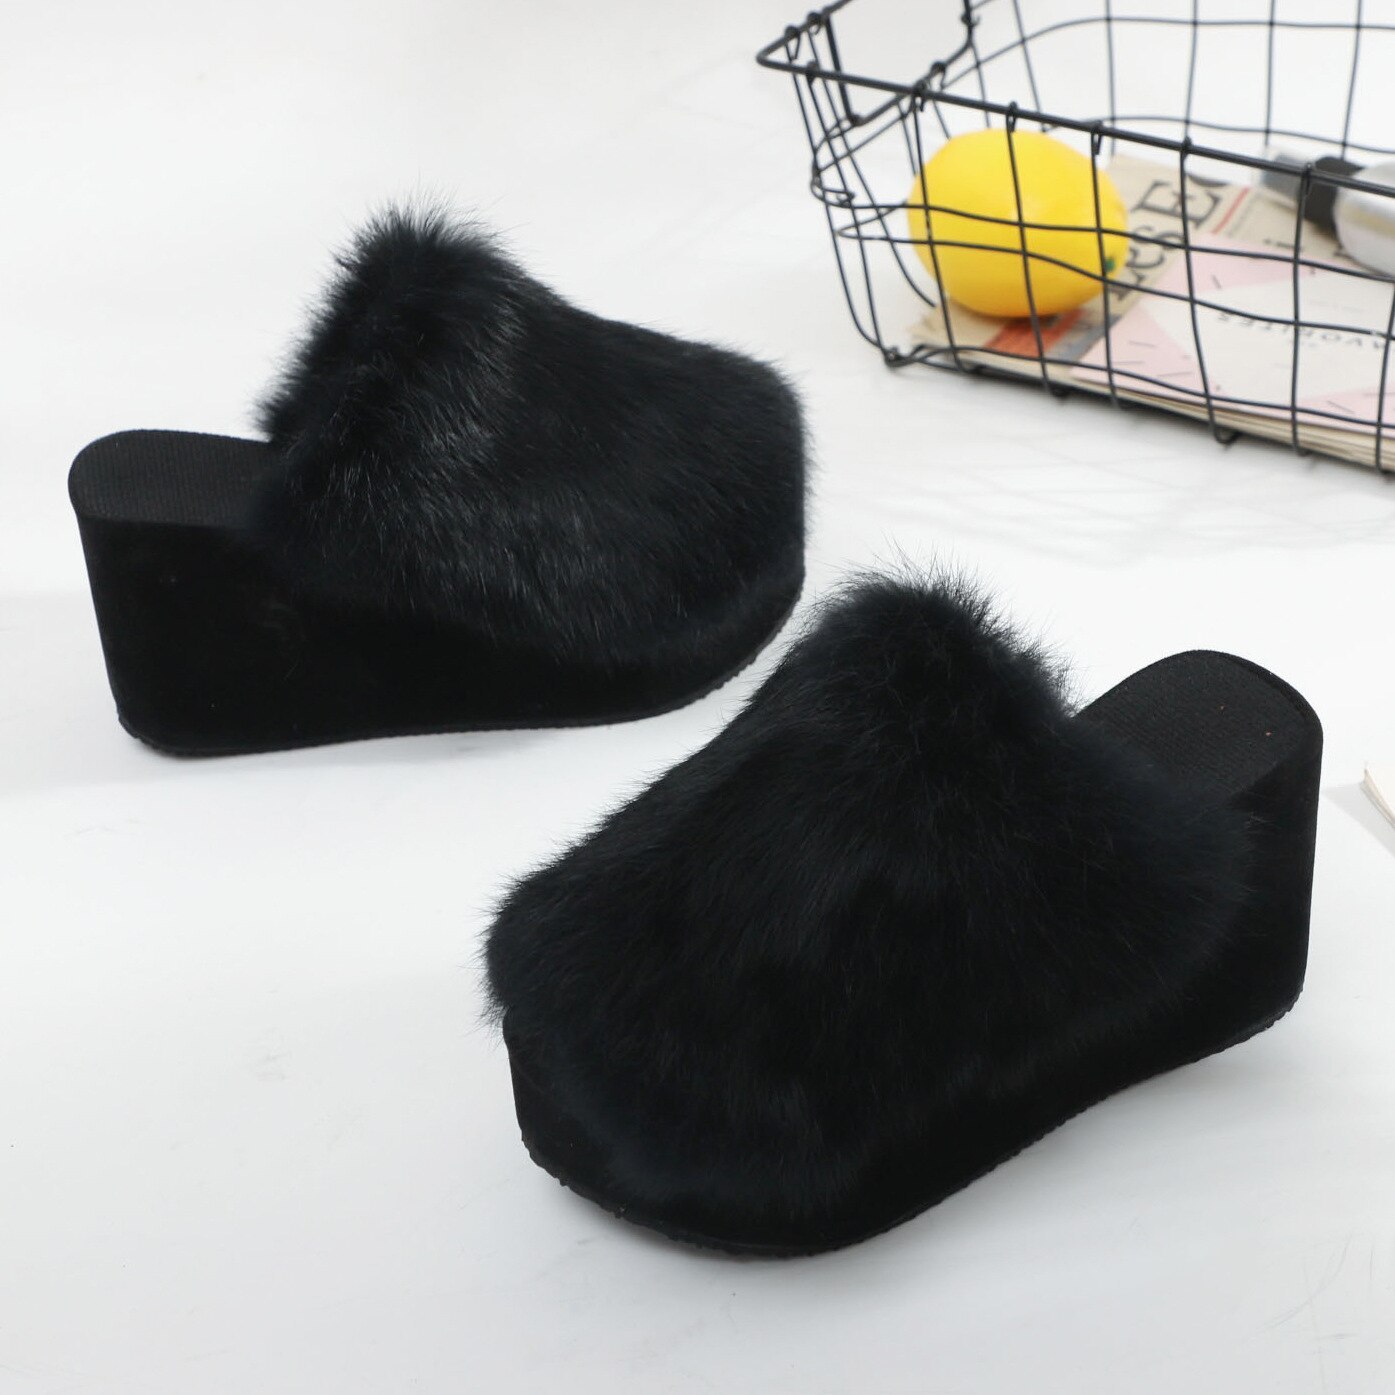 Primary image for ry Slippers Women's Autumn And Winter New Slope Heel Platform Slippers Rabbit  H